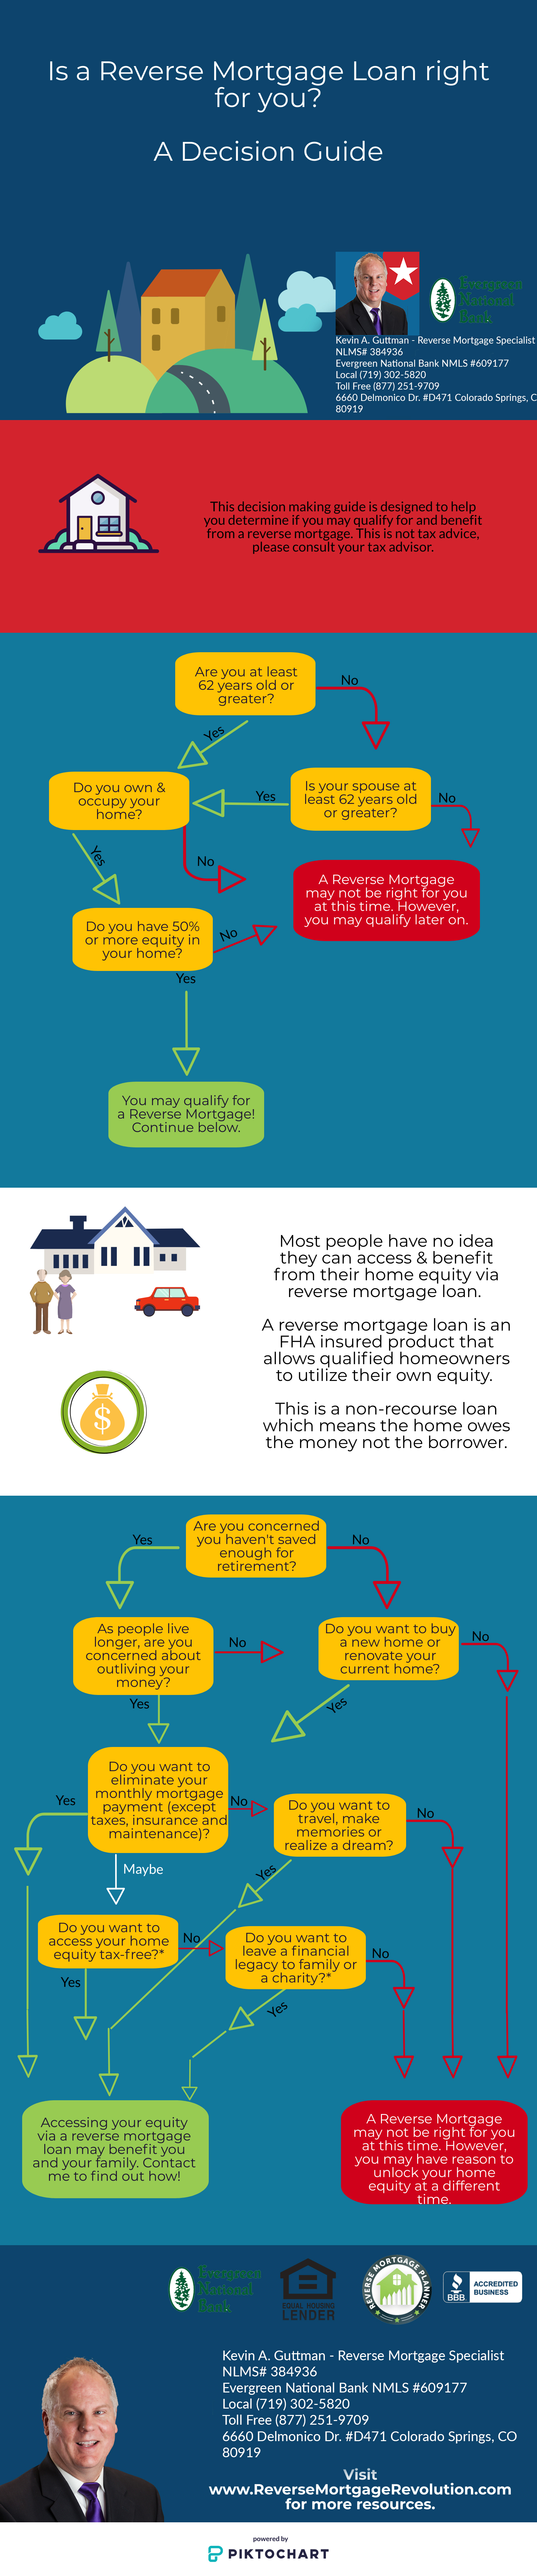 reverse mortgage resources